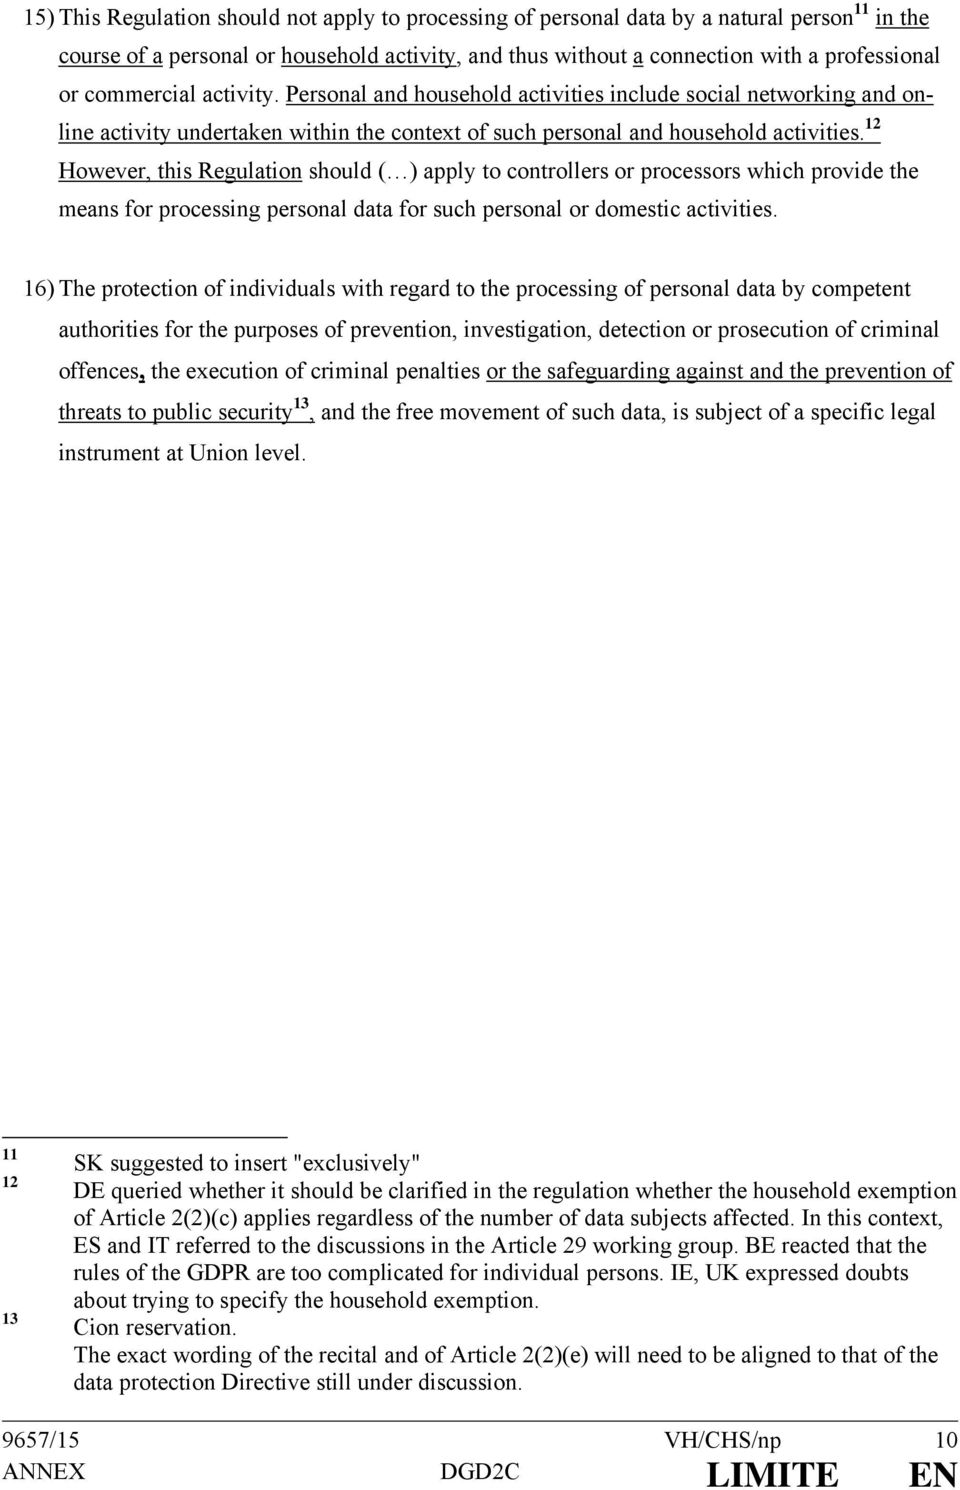 12 However, this Regulation should ( ) apply to controllers or processors which provide the means for processing personal data for such personal or domestic activities.